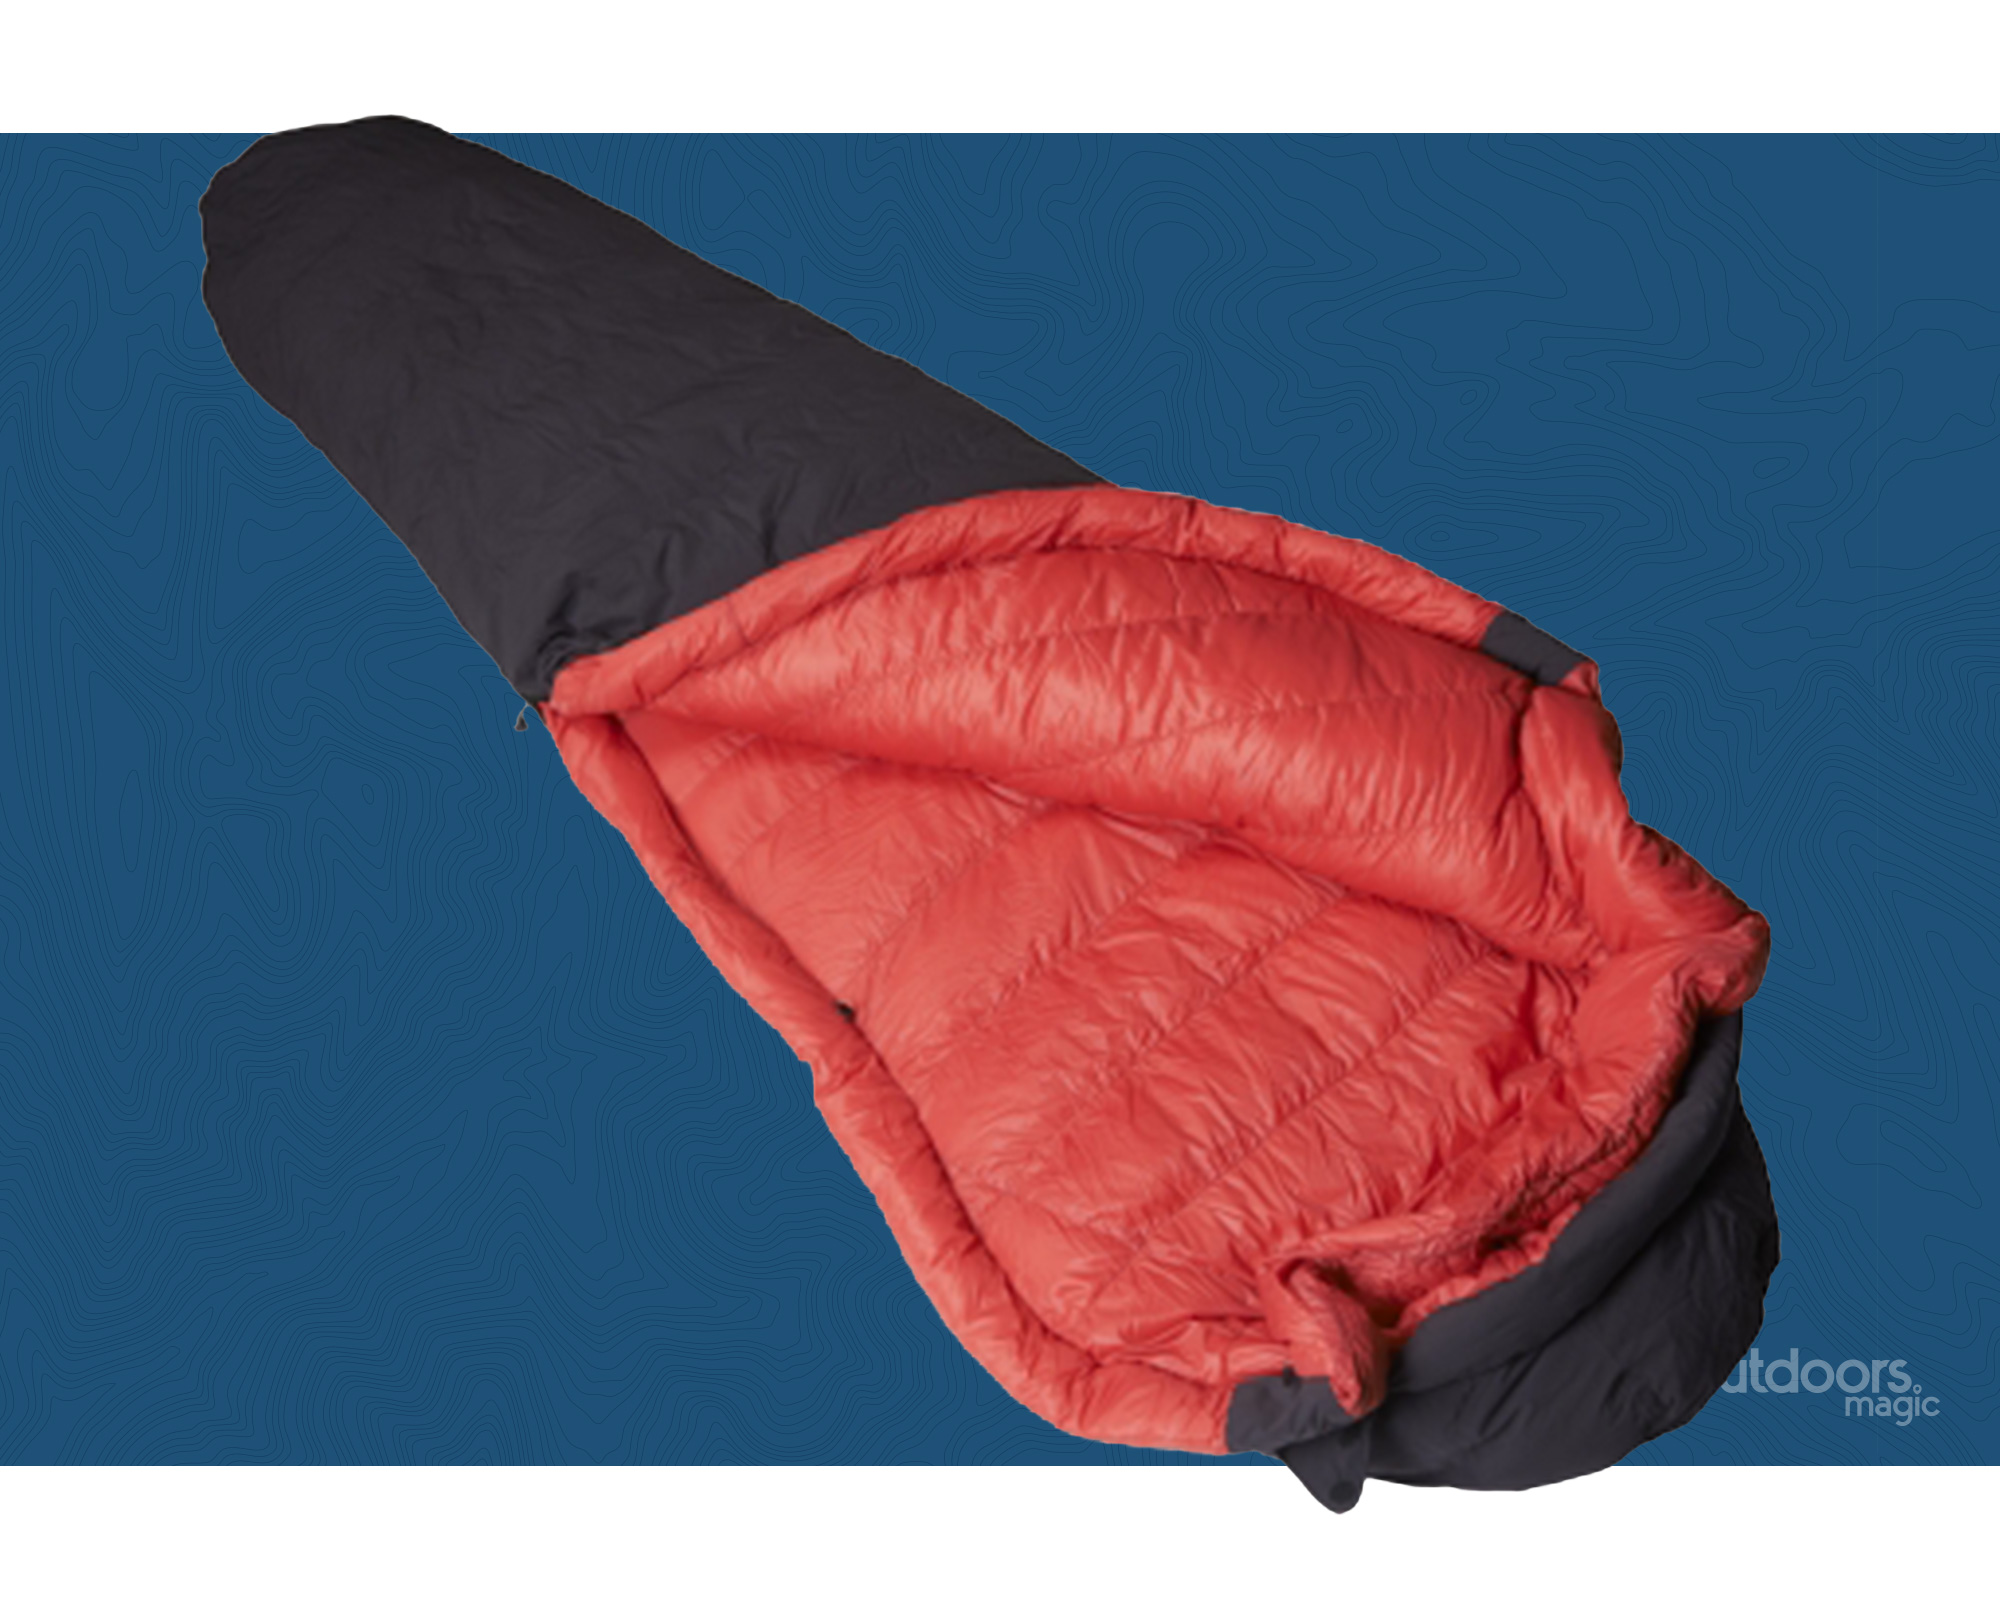 10 Items The Pros Never Leave For A Winter Adventure Without 